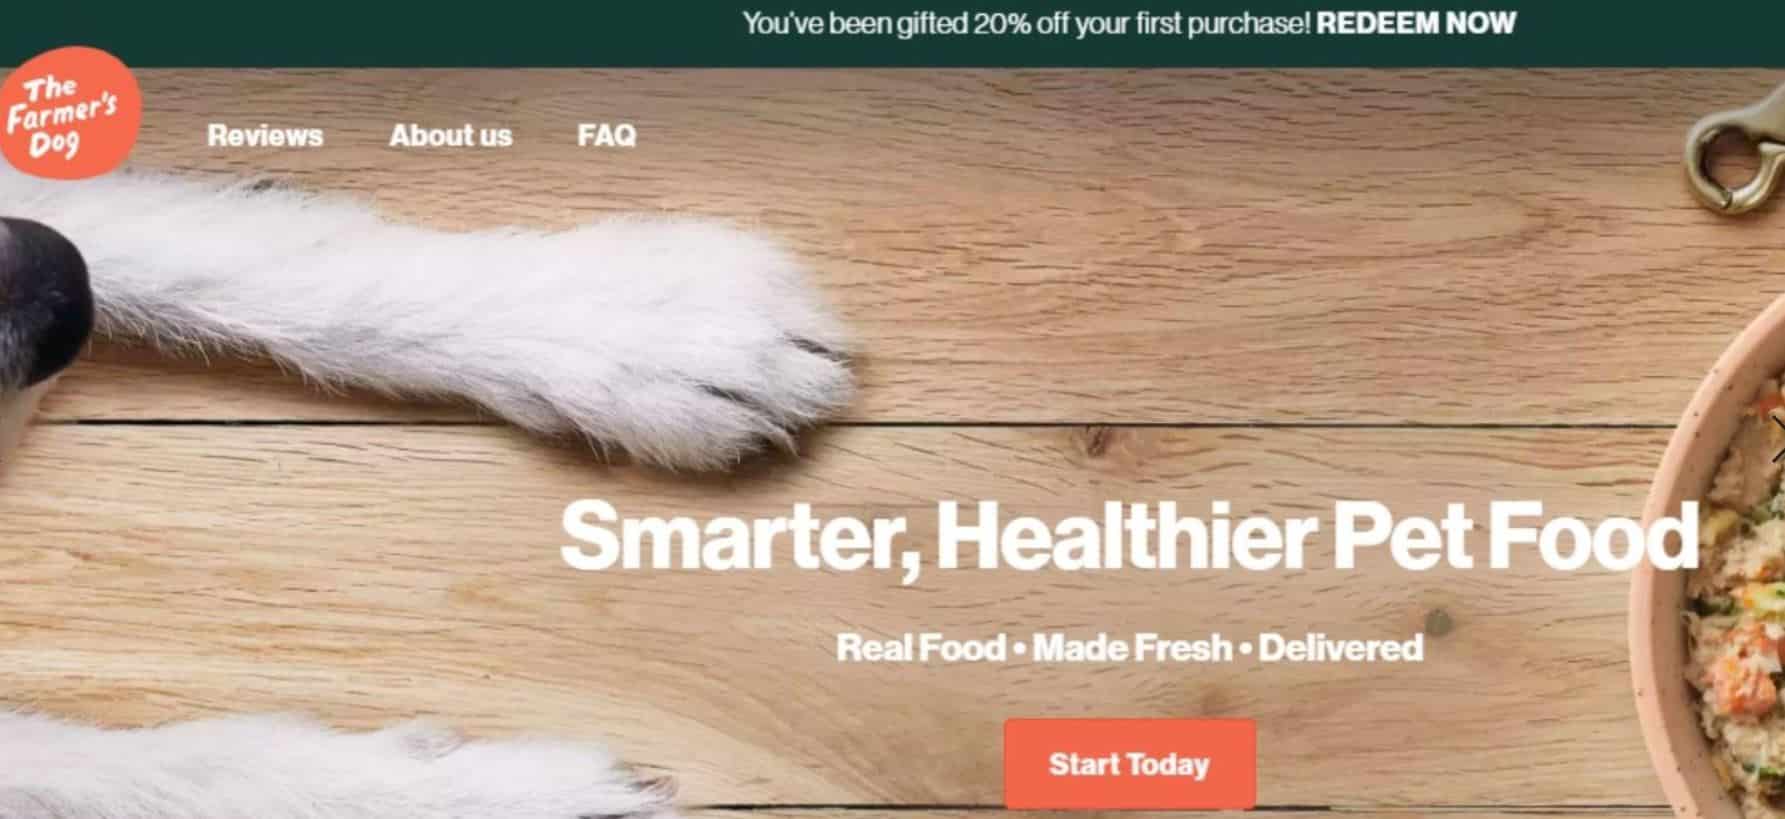 Farmer's Dog is the 2nd best pet food delivery option